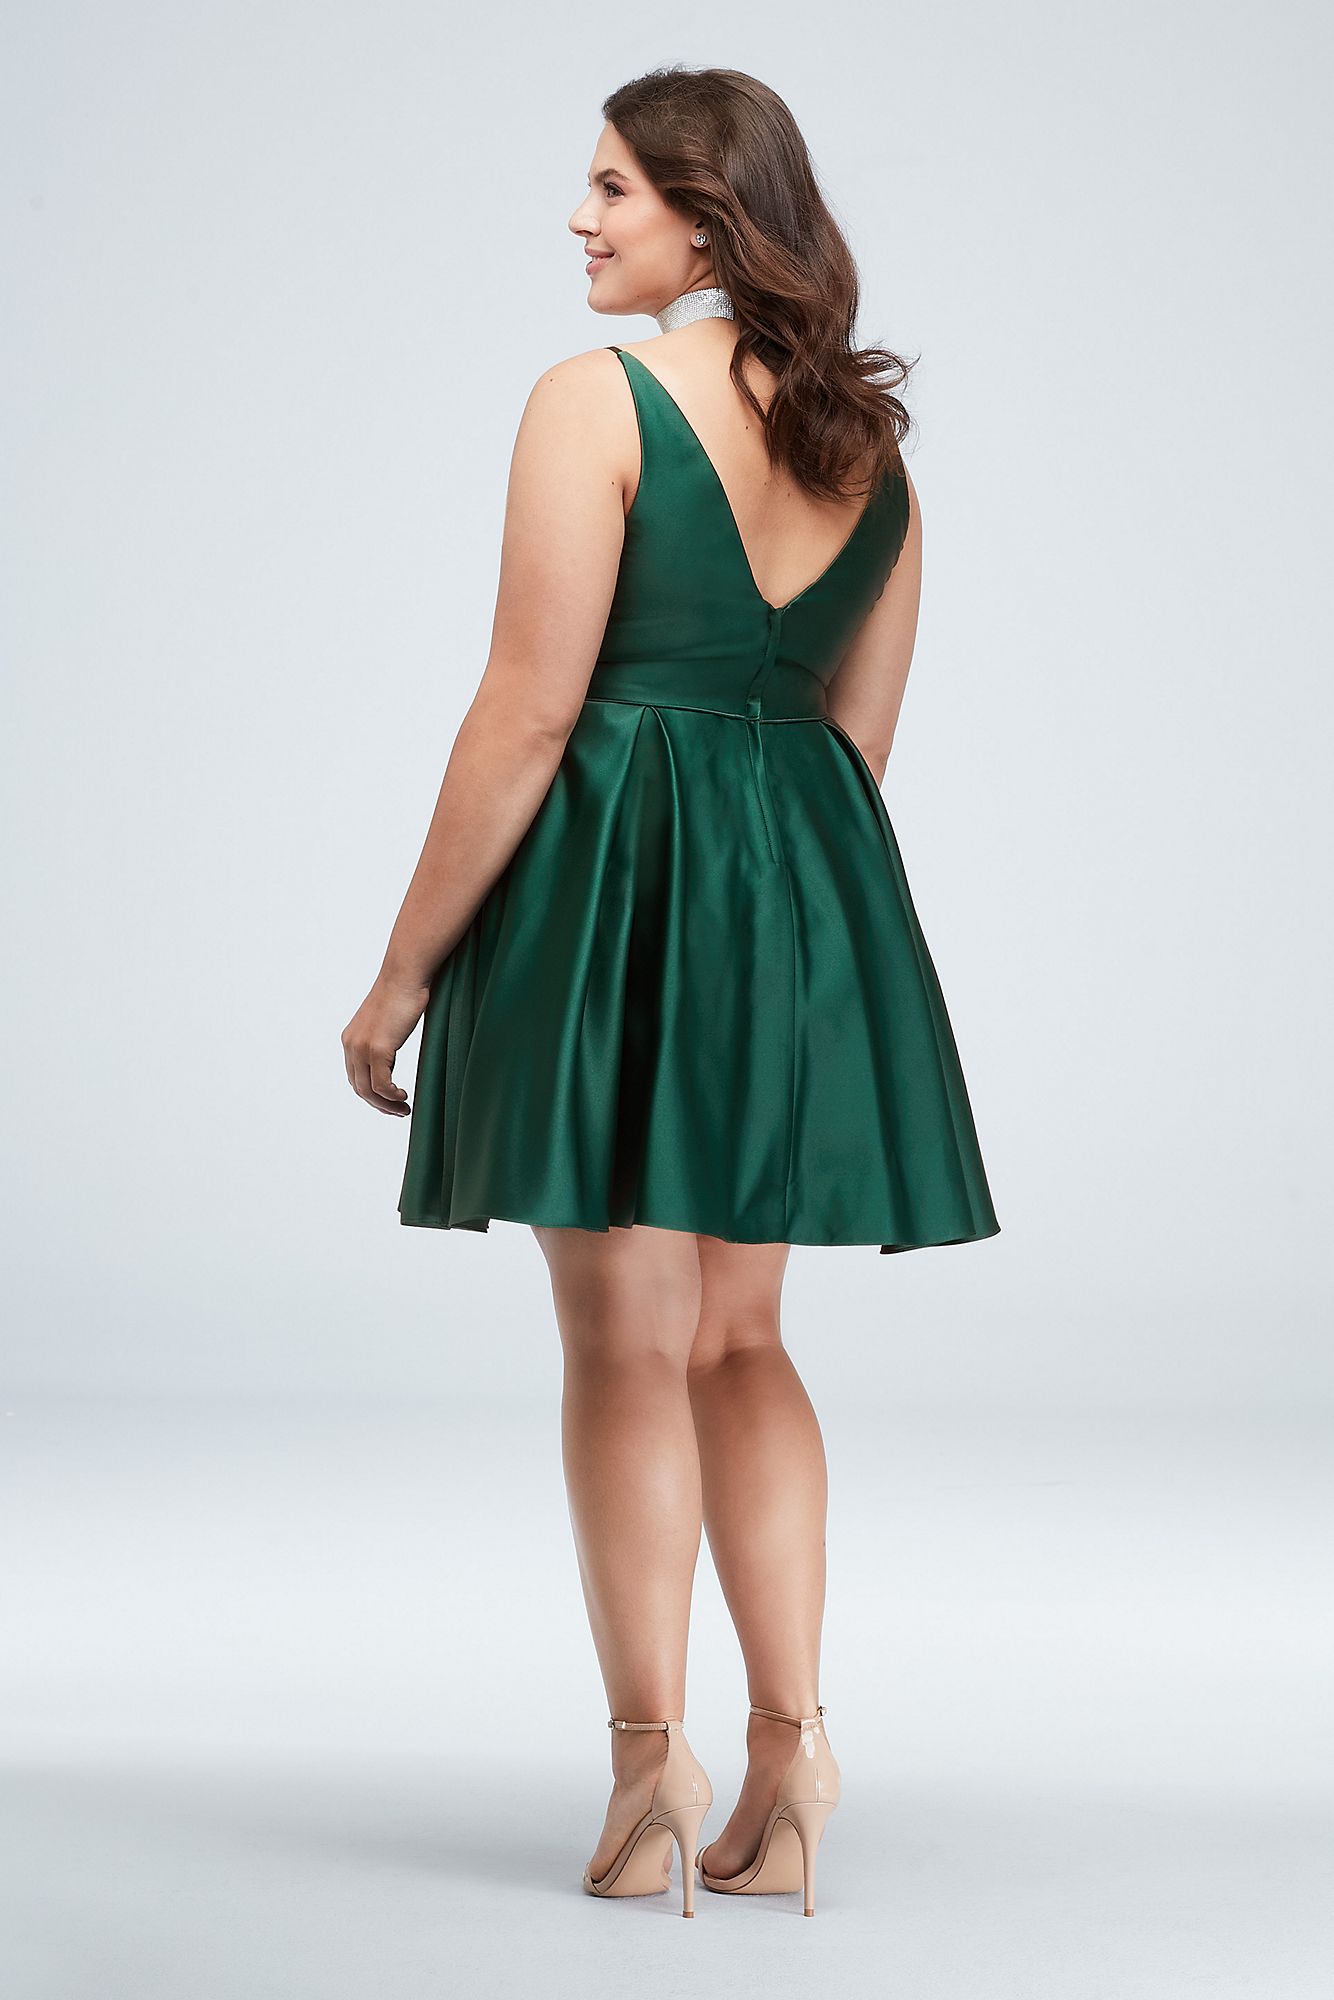 Plus Size Plung V Neck Short A-line 1393BNW Homecoming Dress with Pockets